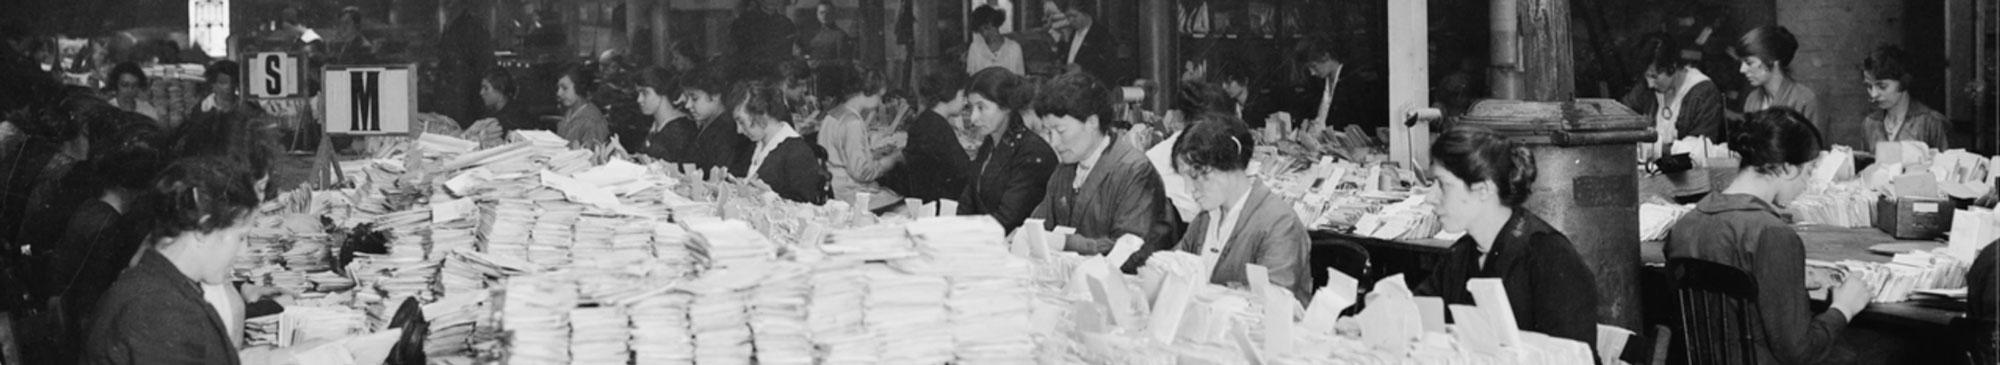 Women in the first world war with piles of letters